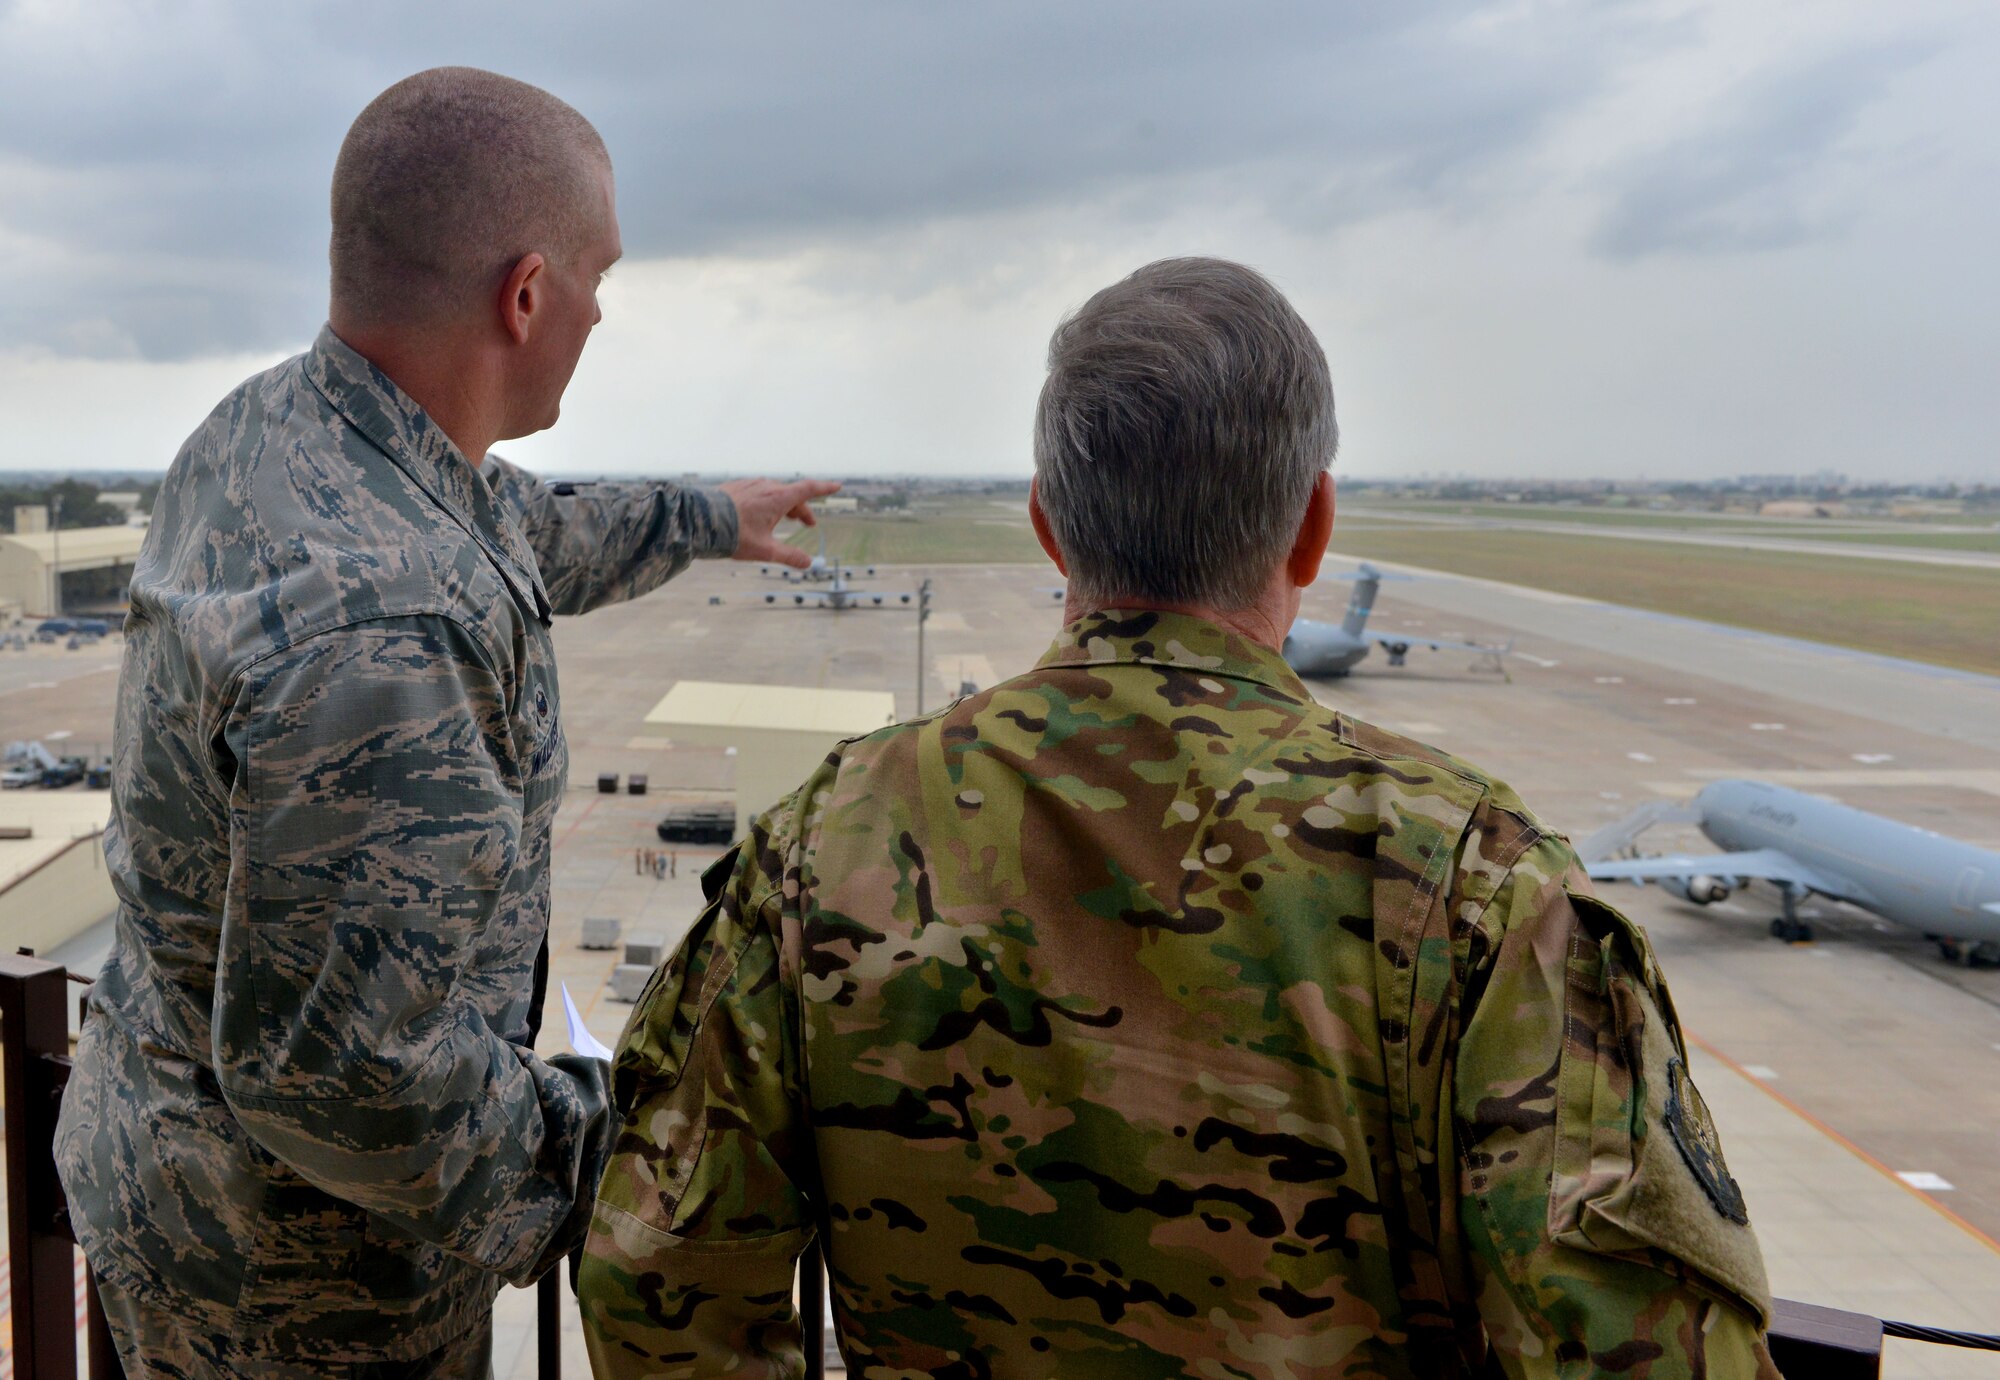 Col. John Walker, 39th Air Base Wing commander, discusses flight line operations with U.S. Air Force Gen. Hawk Carlisle, commander of Air Combat Command, during a base visit Oct. 22, 2015, at Incirlik Air Base, Turkey. Carlisle met with leadership to learn more about the 39th ABW and its mission. (U.S. Air Force photo by Senior Airman Michael Battles/Released)